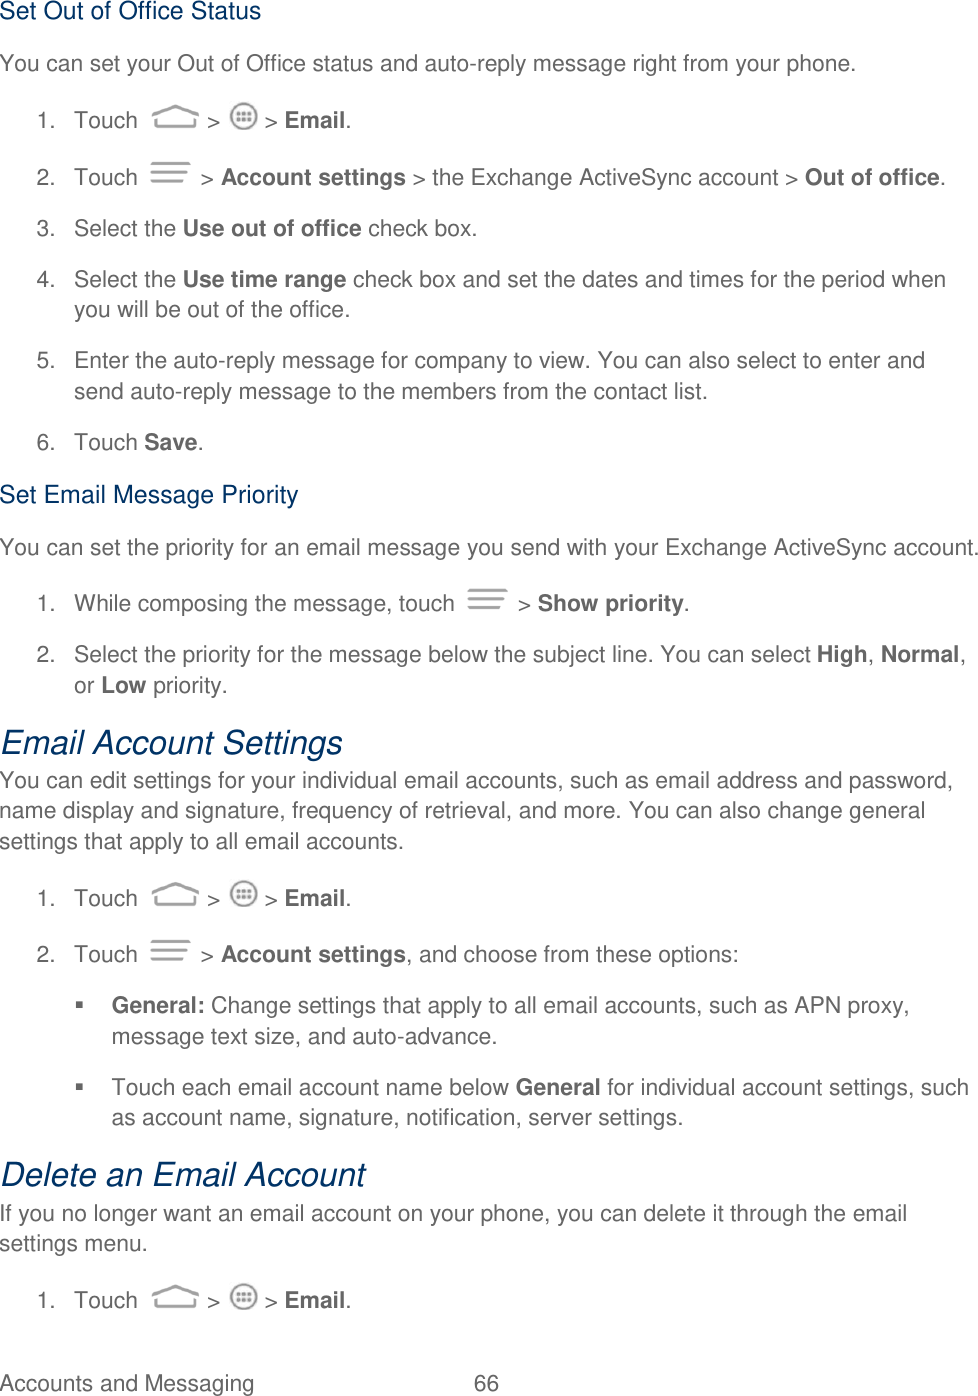 Accounts and Messaging  66   Set Out of Office Status You can set your Out of Office status and auto-reply message right from your phone. 1.  Touch   &gt;   &gt; Email. 2.  Touch   &gt; Account settings &gt; the Exchange ActiveSync account &gt; Out of office. 3.  Select the Use out of office check box. 4.  Select the Use time range check box and set the dates and times for the period when you will be out of the office. 5.  Enter the auto-reply message for company to view. You can also select to enter and send auto-reply message to the members from the contact list. 6.  Touch Save. Set Email Message Priority You can set the priority for an email message you send with your Exchange ActiveSync account. 1.  While composing the message, touch   &gt; Show priority. 2.  Select the priority for the message below the subject line. You can select High, Normal, or Low priority. Email Account Settings You can edit settings for your individual email accounts, such as email address and password, name display and signature, frequency of retrieval, and more. You can also change general settings that apply to all email accounts. 1.  Touch   &gt;   &gt; Email. 2.  Touch   &gt; Account settings, and choose from these options:   General: Change settings that apply to all email accounts, such as APN proxy, message text size, and auto-advance.   Touch each email account name below General for individual account settings, such as account name, signature, notification, server settings. Delete an Email Account If you no longer want an email account on your phone, you can delete it through the email settings menu. 1.  Touch   &gt;   &gt; Email. 